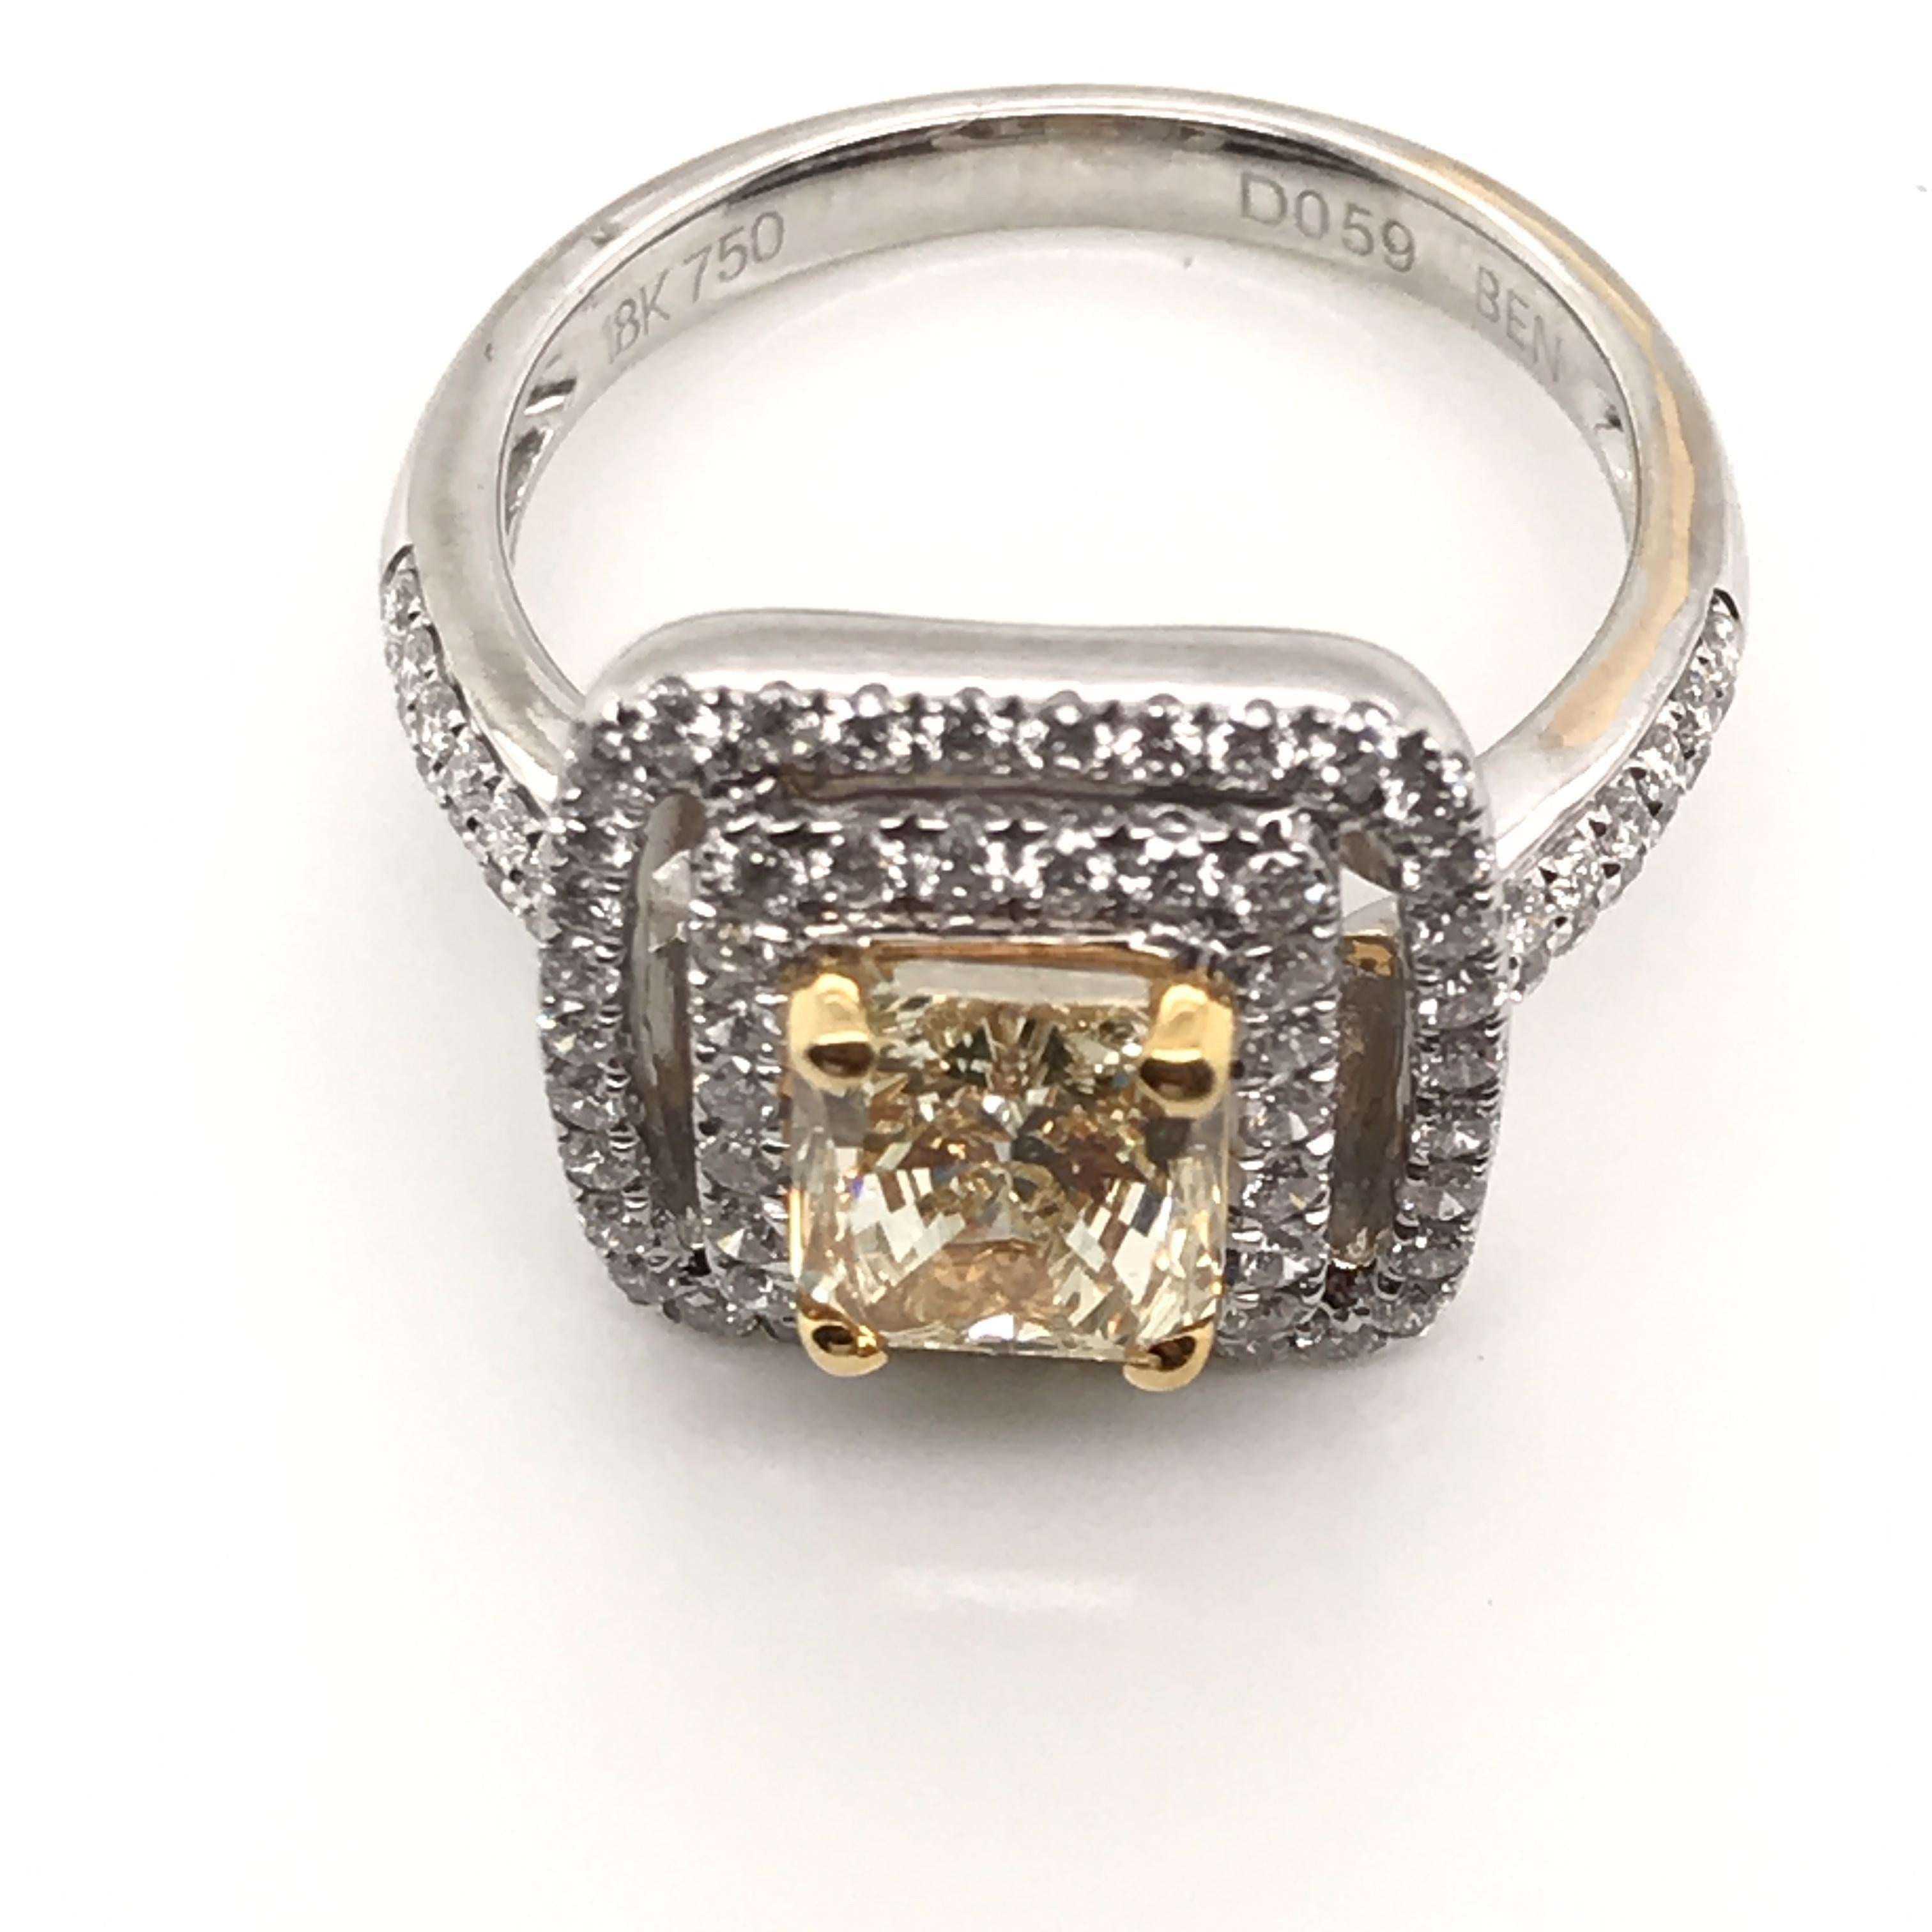 2.11 Carat Natural Fancy Yellow Diamond Ring with 18 Karat White and Yellow Gold In New Condition For Sale In New York, NY